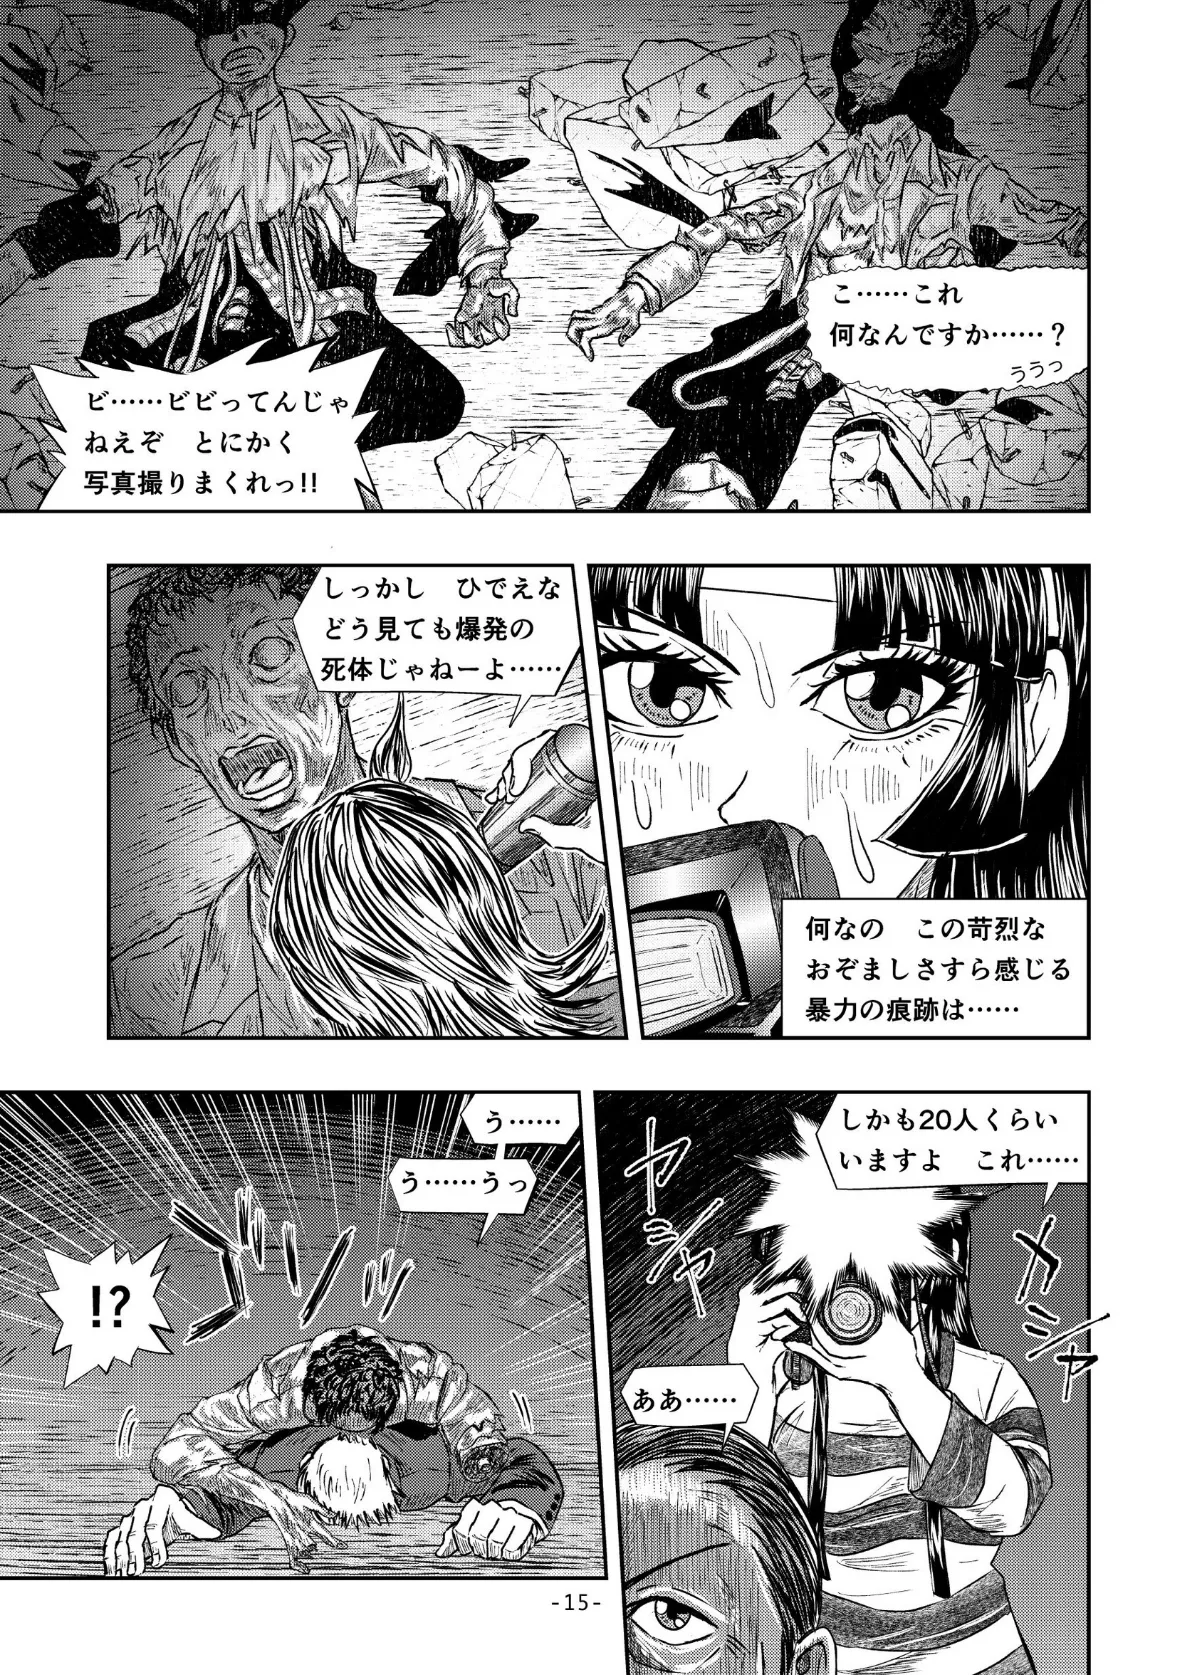 XENON REBOOT＜BASED STORY ON ’BIO DIVER XENON’＞【分冊版】 Chapter1 STRANGERS When We Meet（3） 15ページ